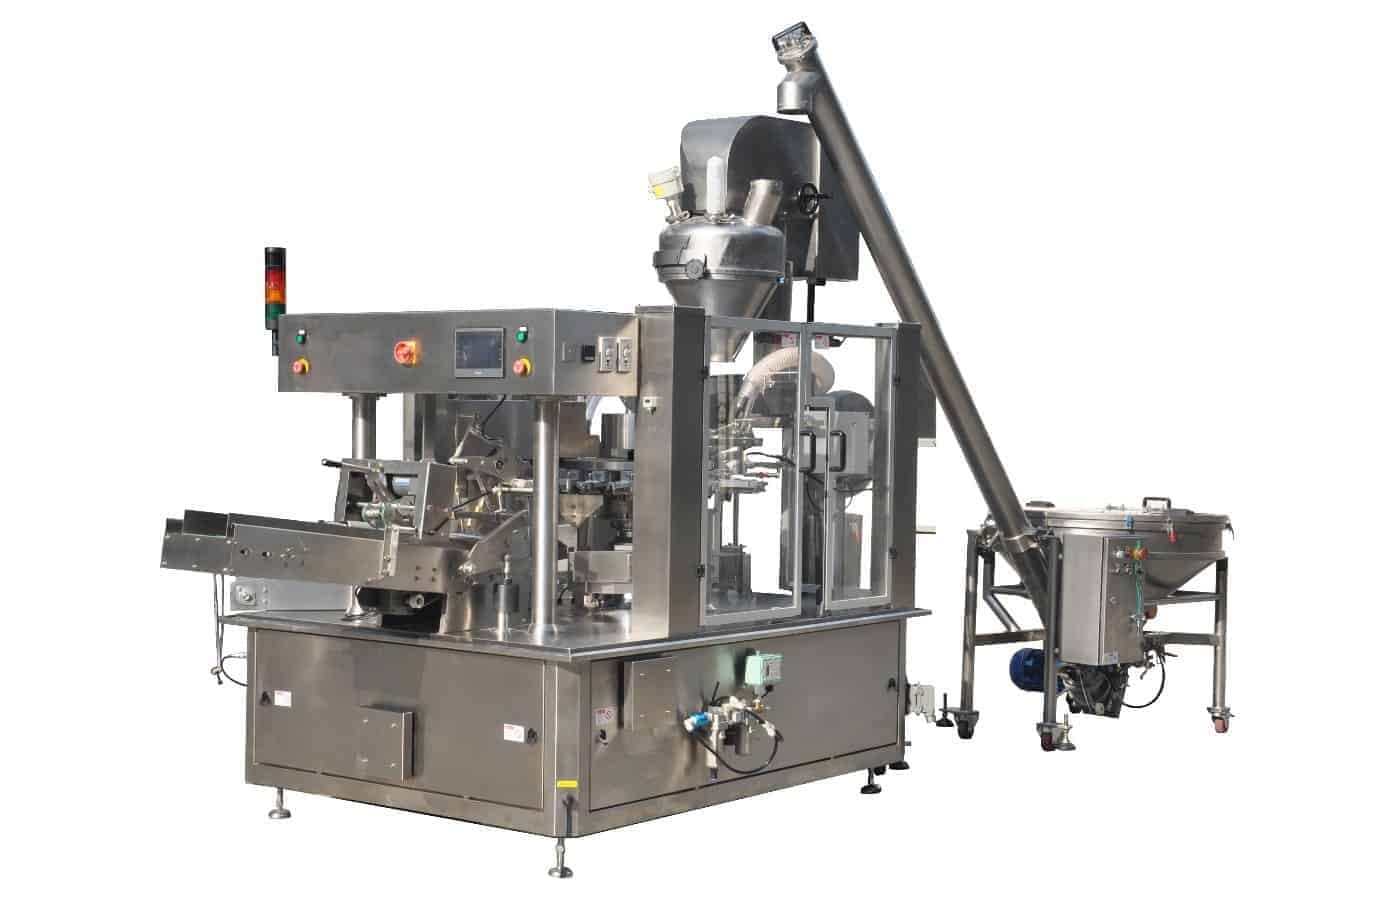 The ultimate guide to shrink wrap machinery